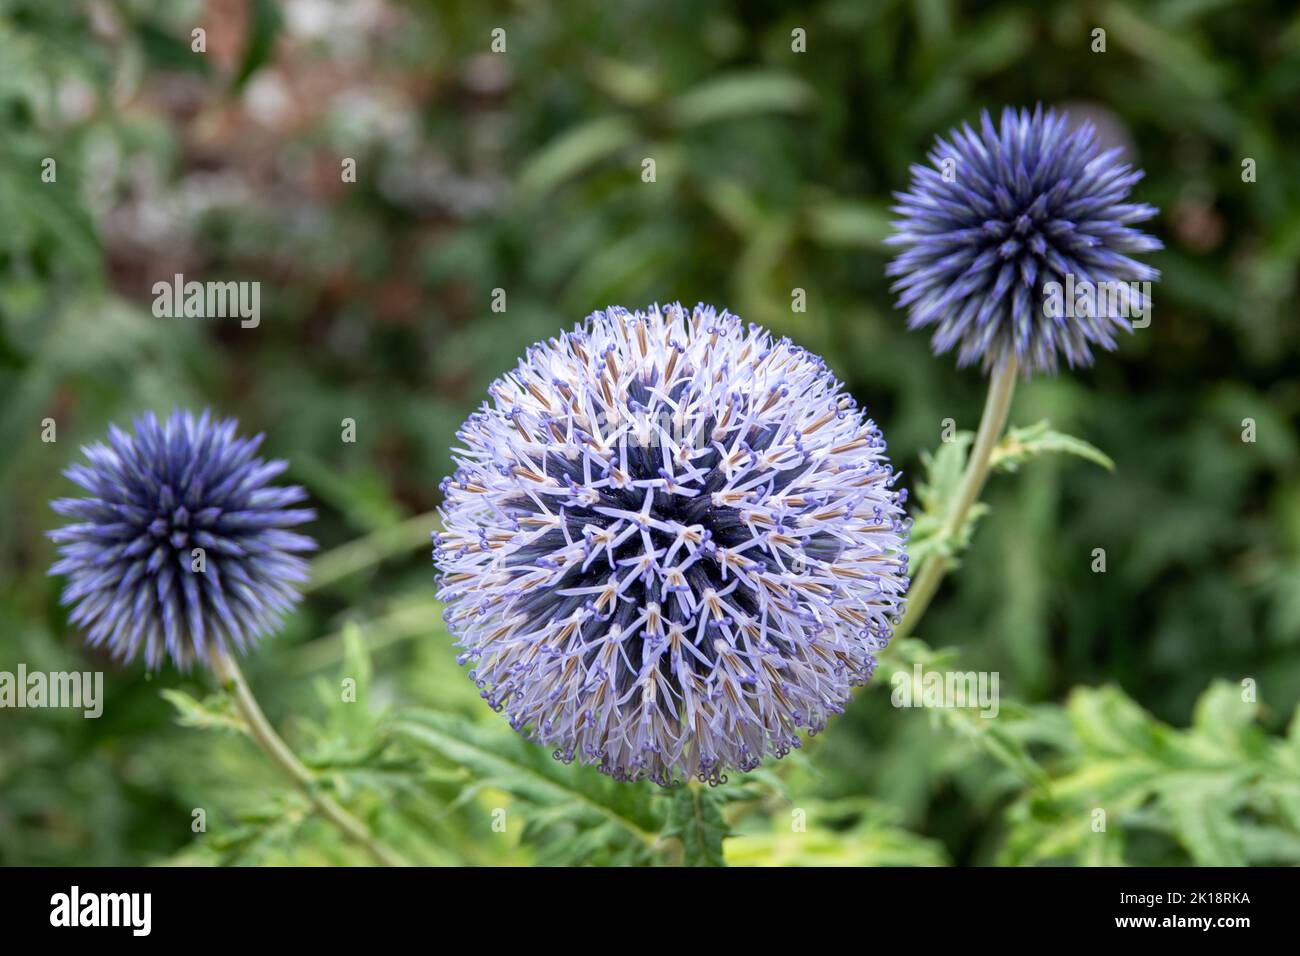 echinops bannaticus blue globe thistle a unique member of the sunflower family that produces bright blue thistle like globe flowers Stock Photo